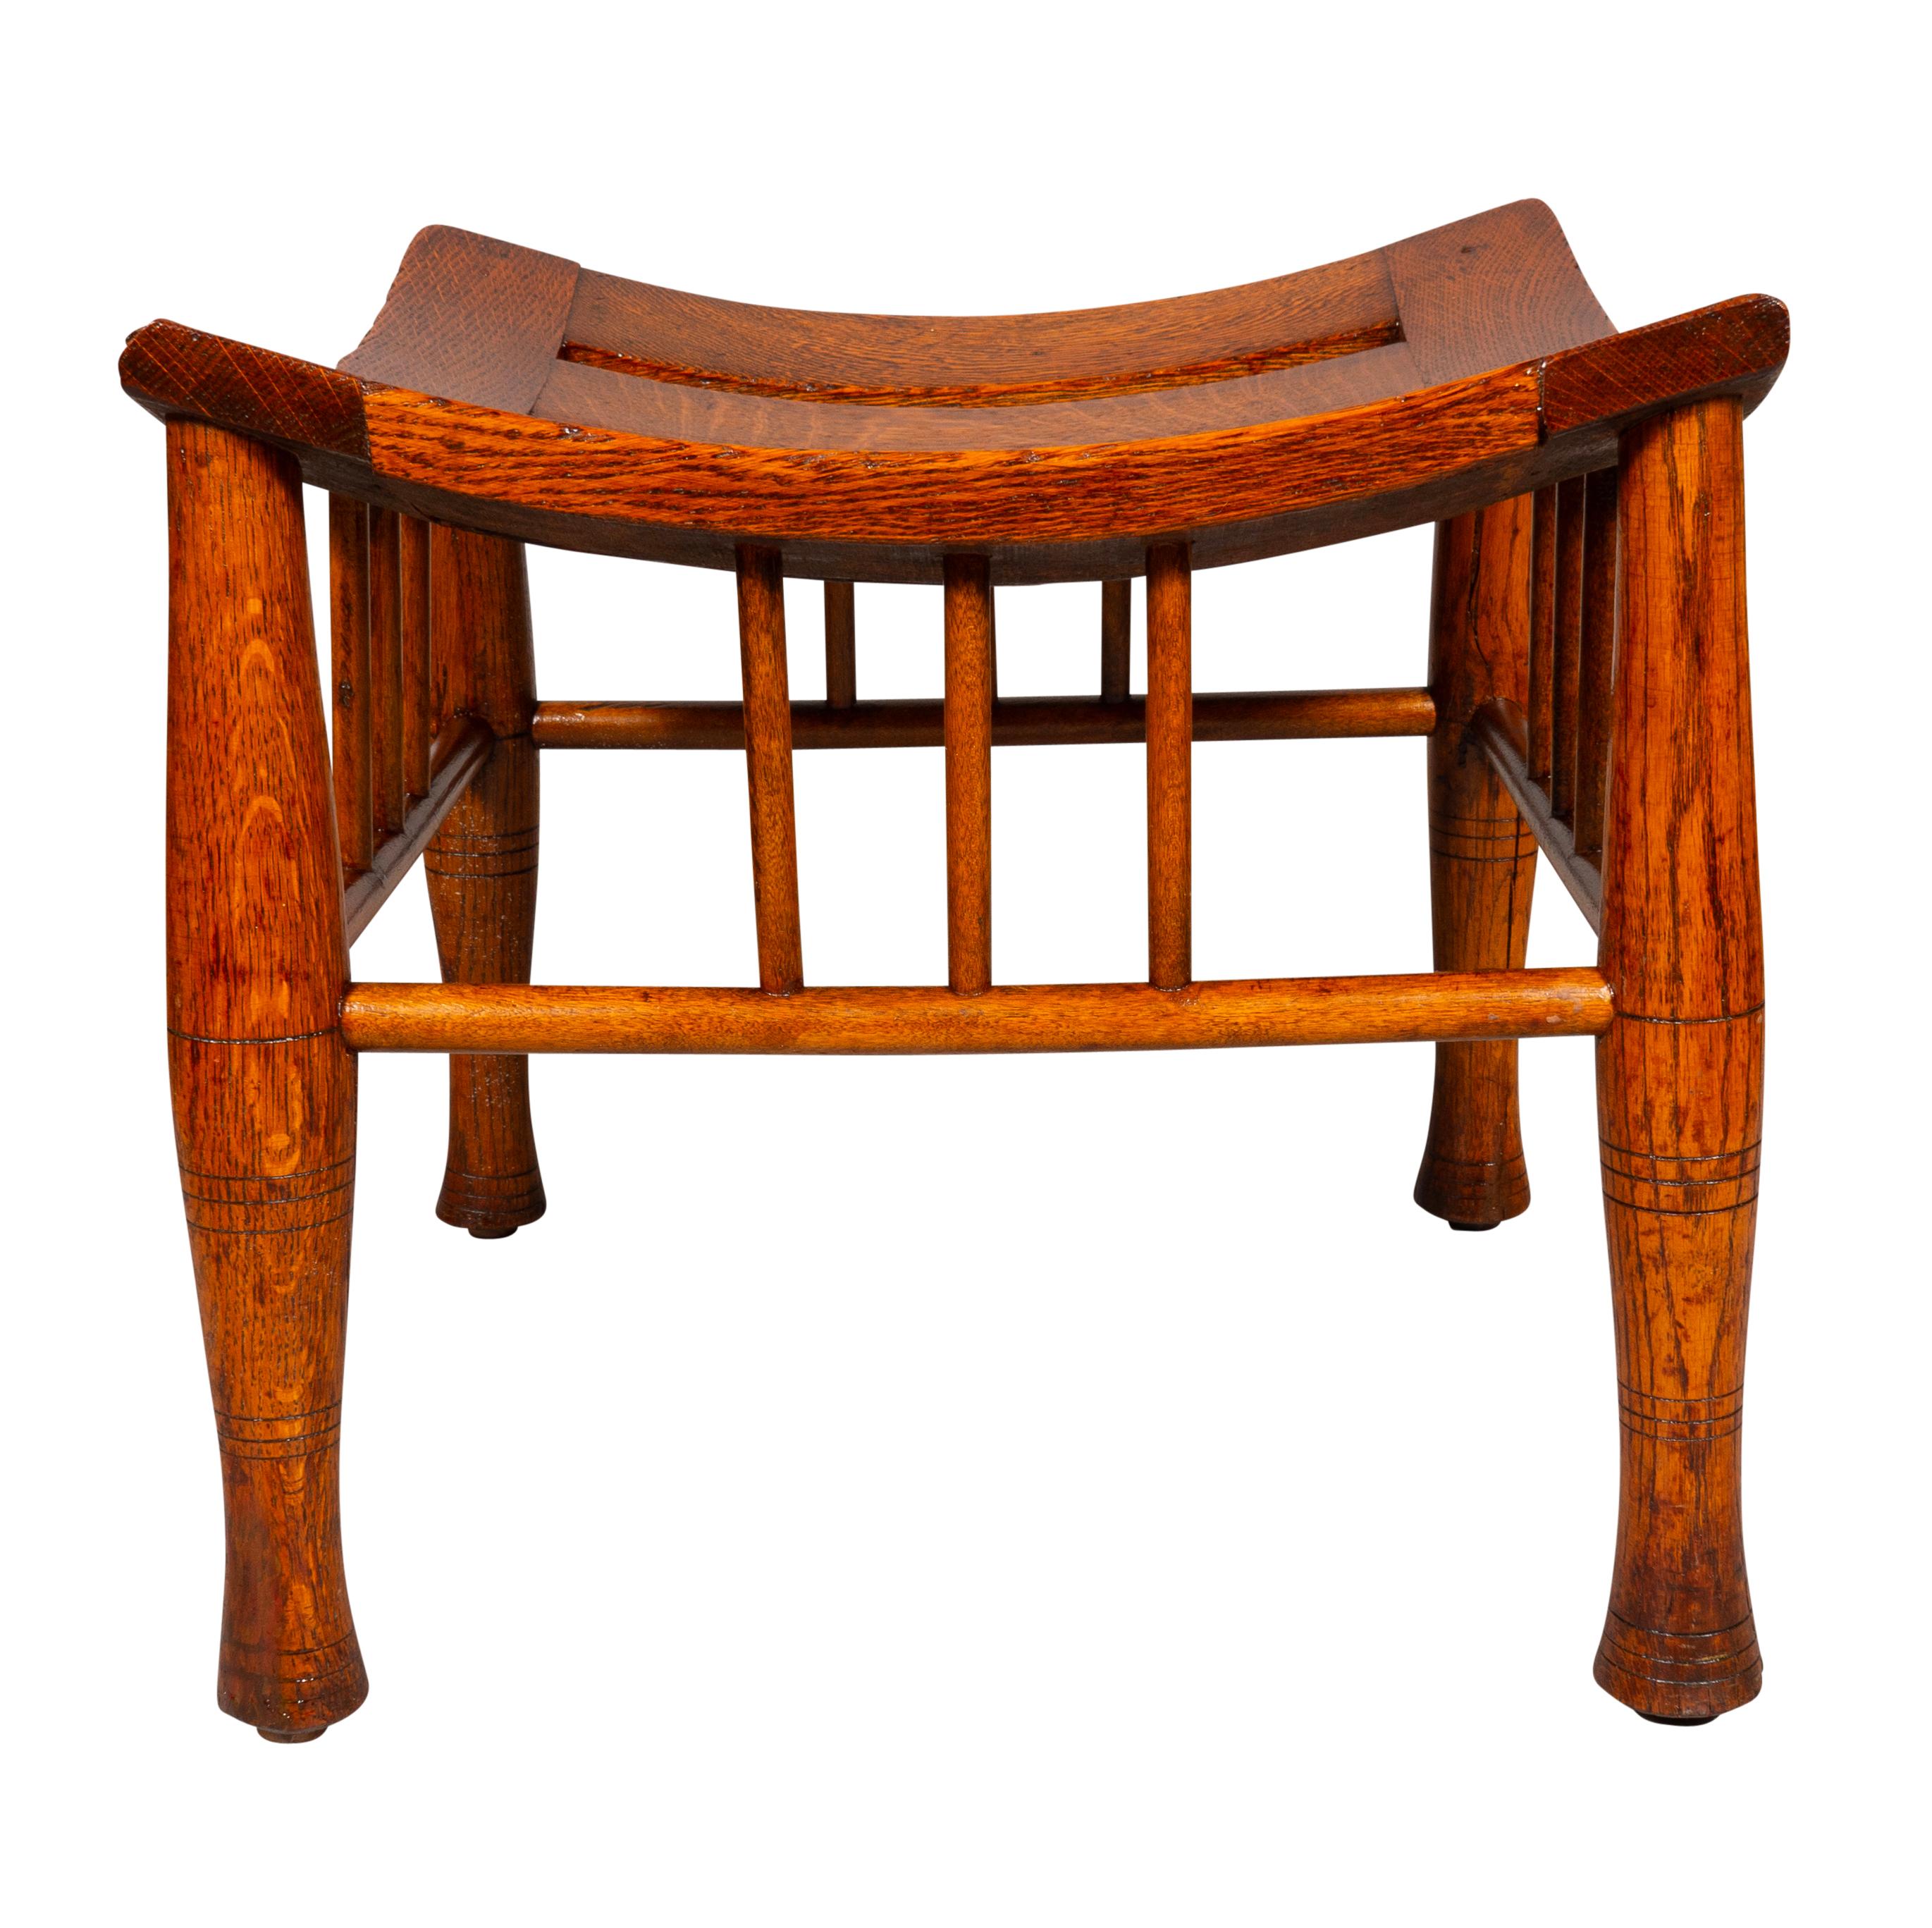 19th Century American Aesthetic Oak Thebes Stool For Sale